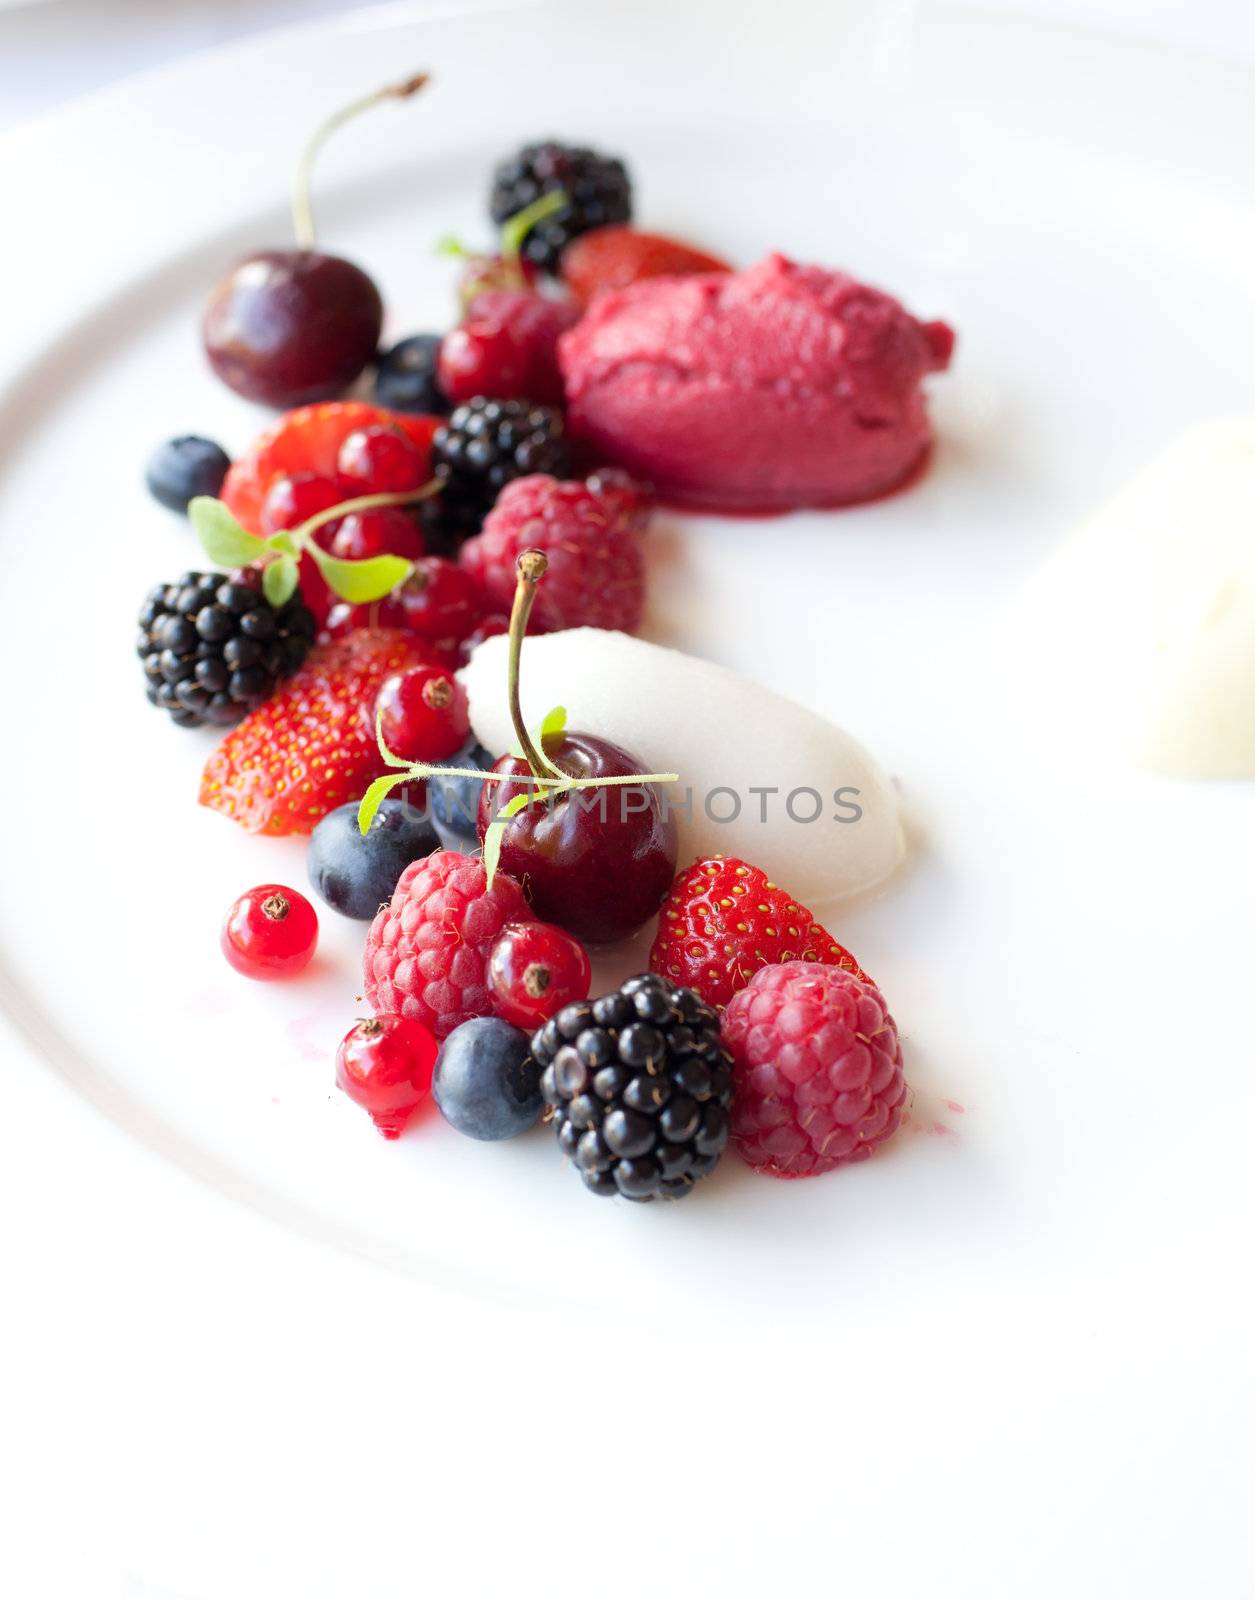 Delicious and fresh dessert with sorbet icecream and fresh berries